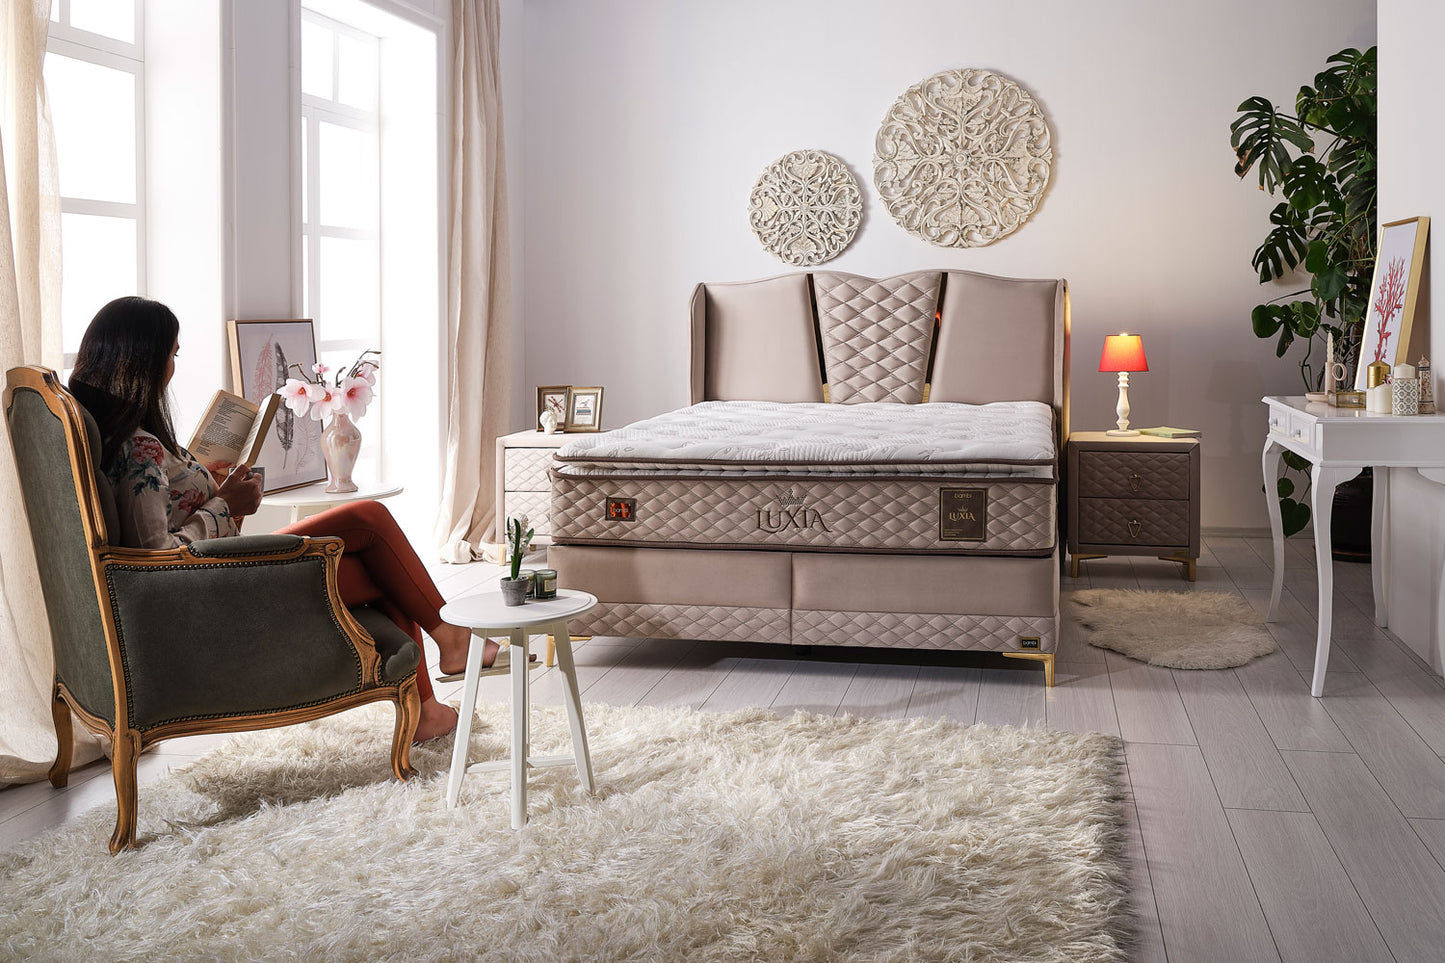 Luxia Boxspring Bett  Im chlafzimmer